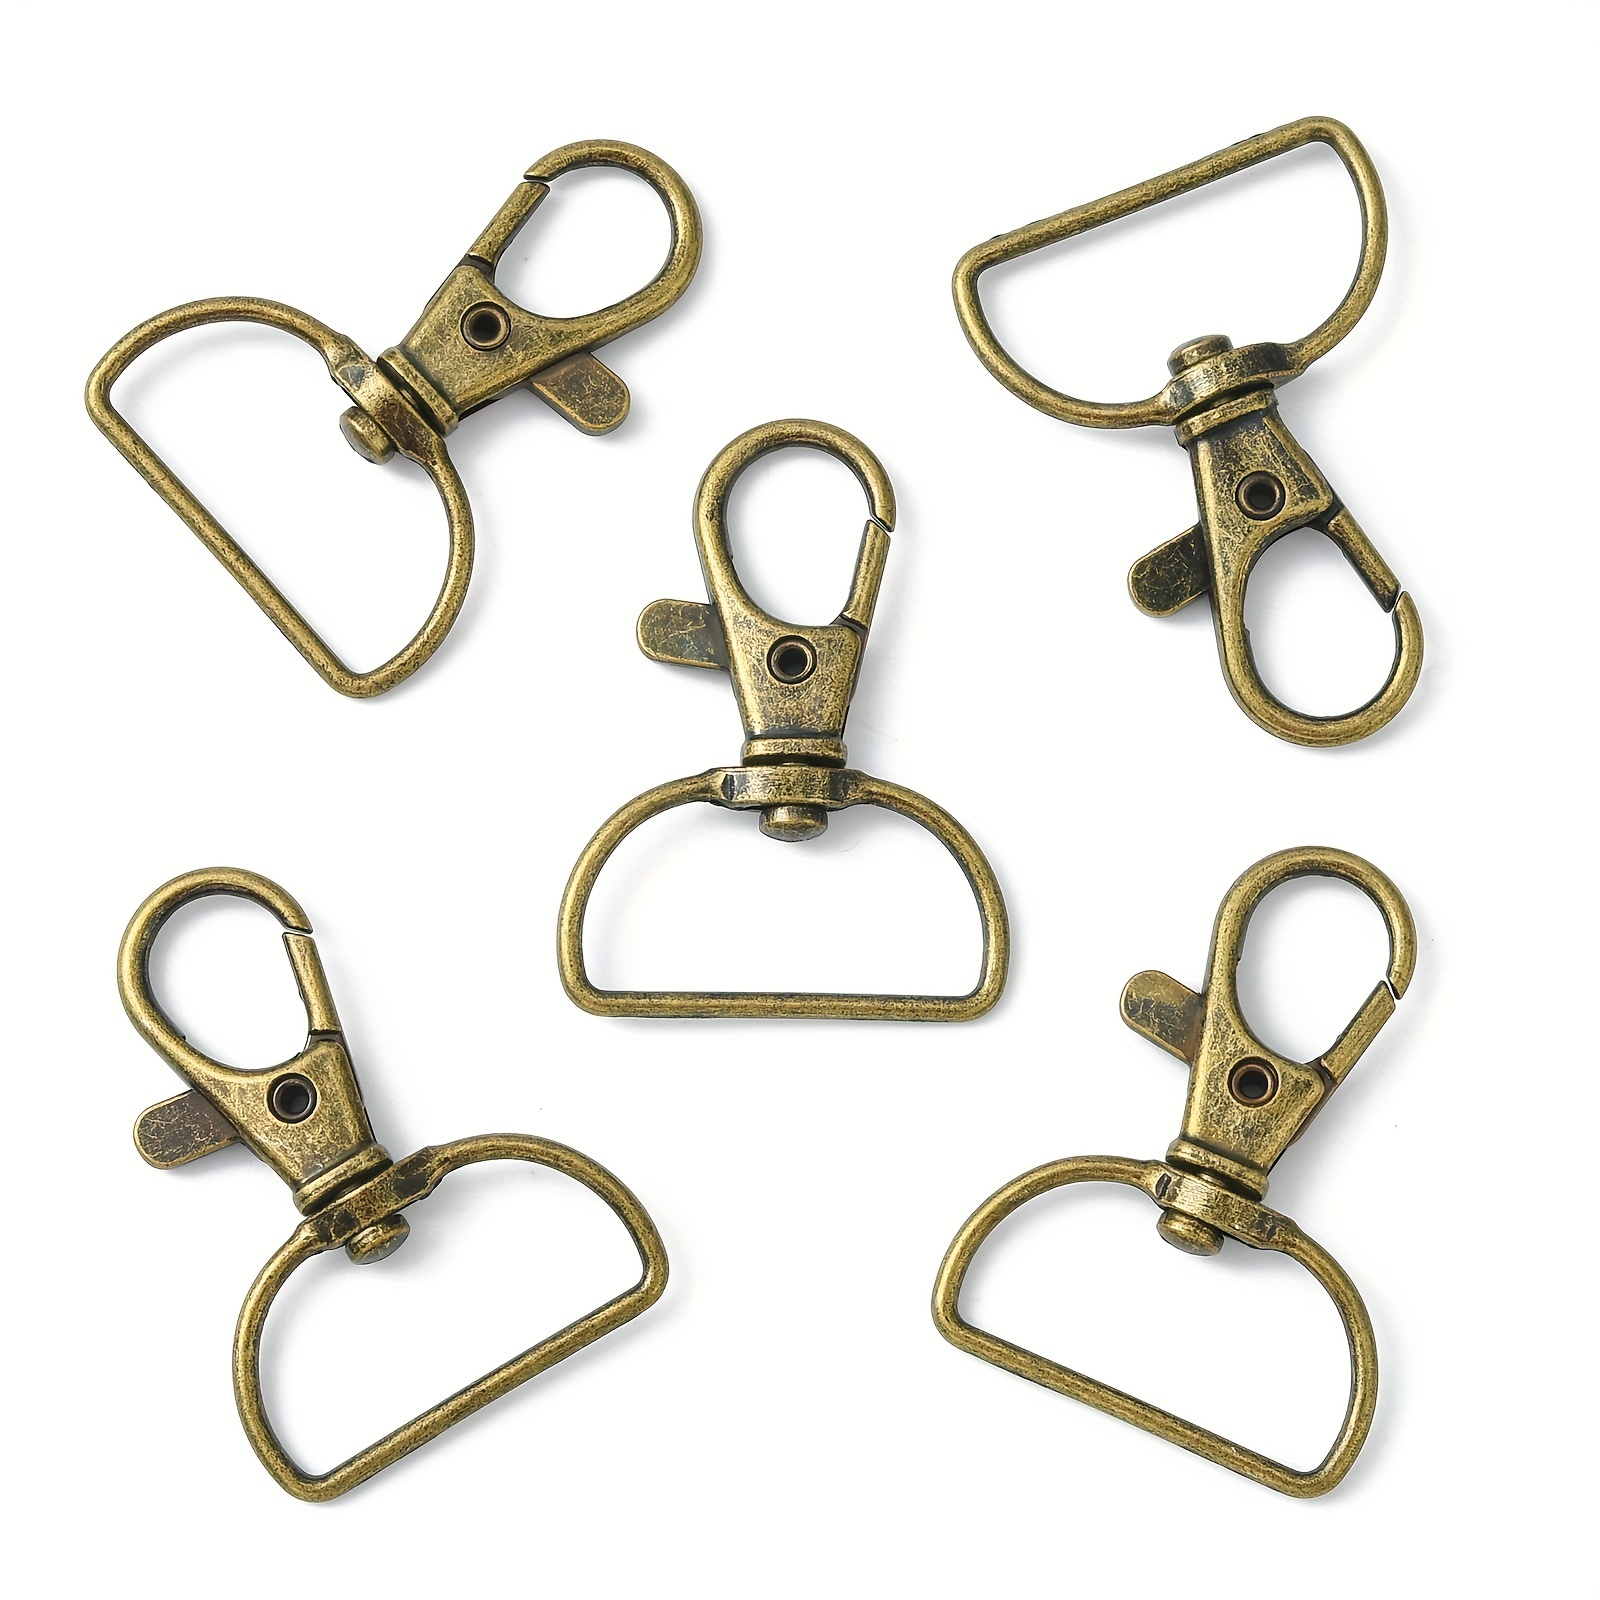 10Pcs Swivel Clasps Snap Hooks and D Rings for Lanyard and DIY Craft